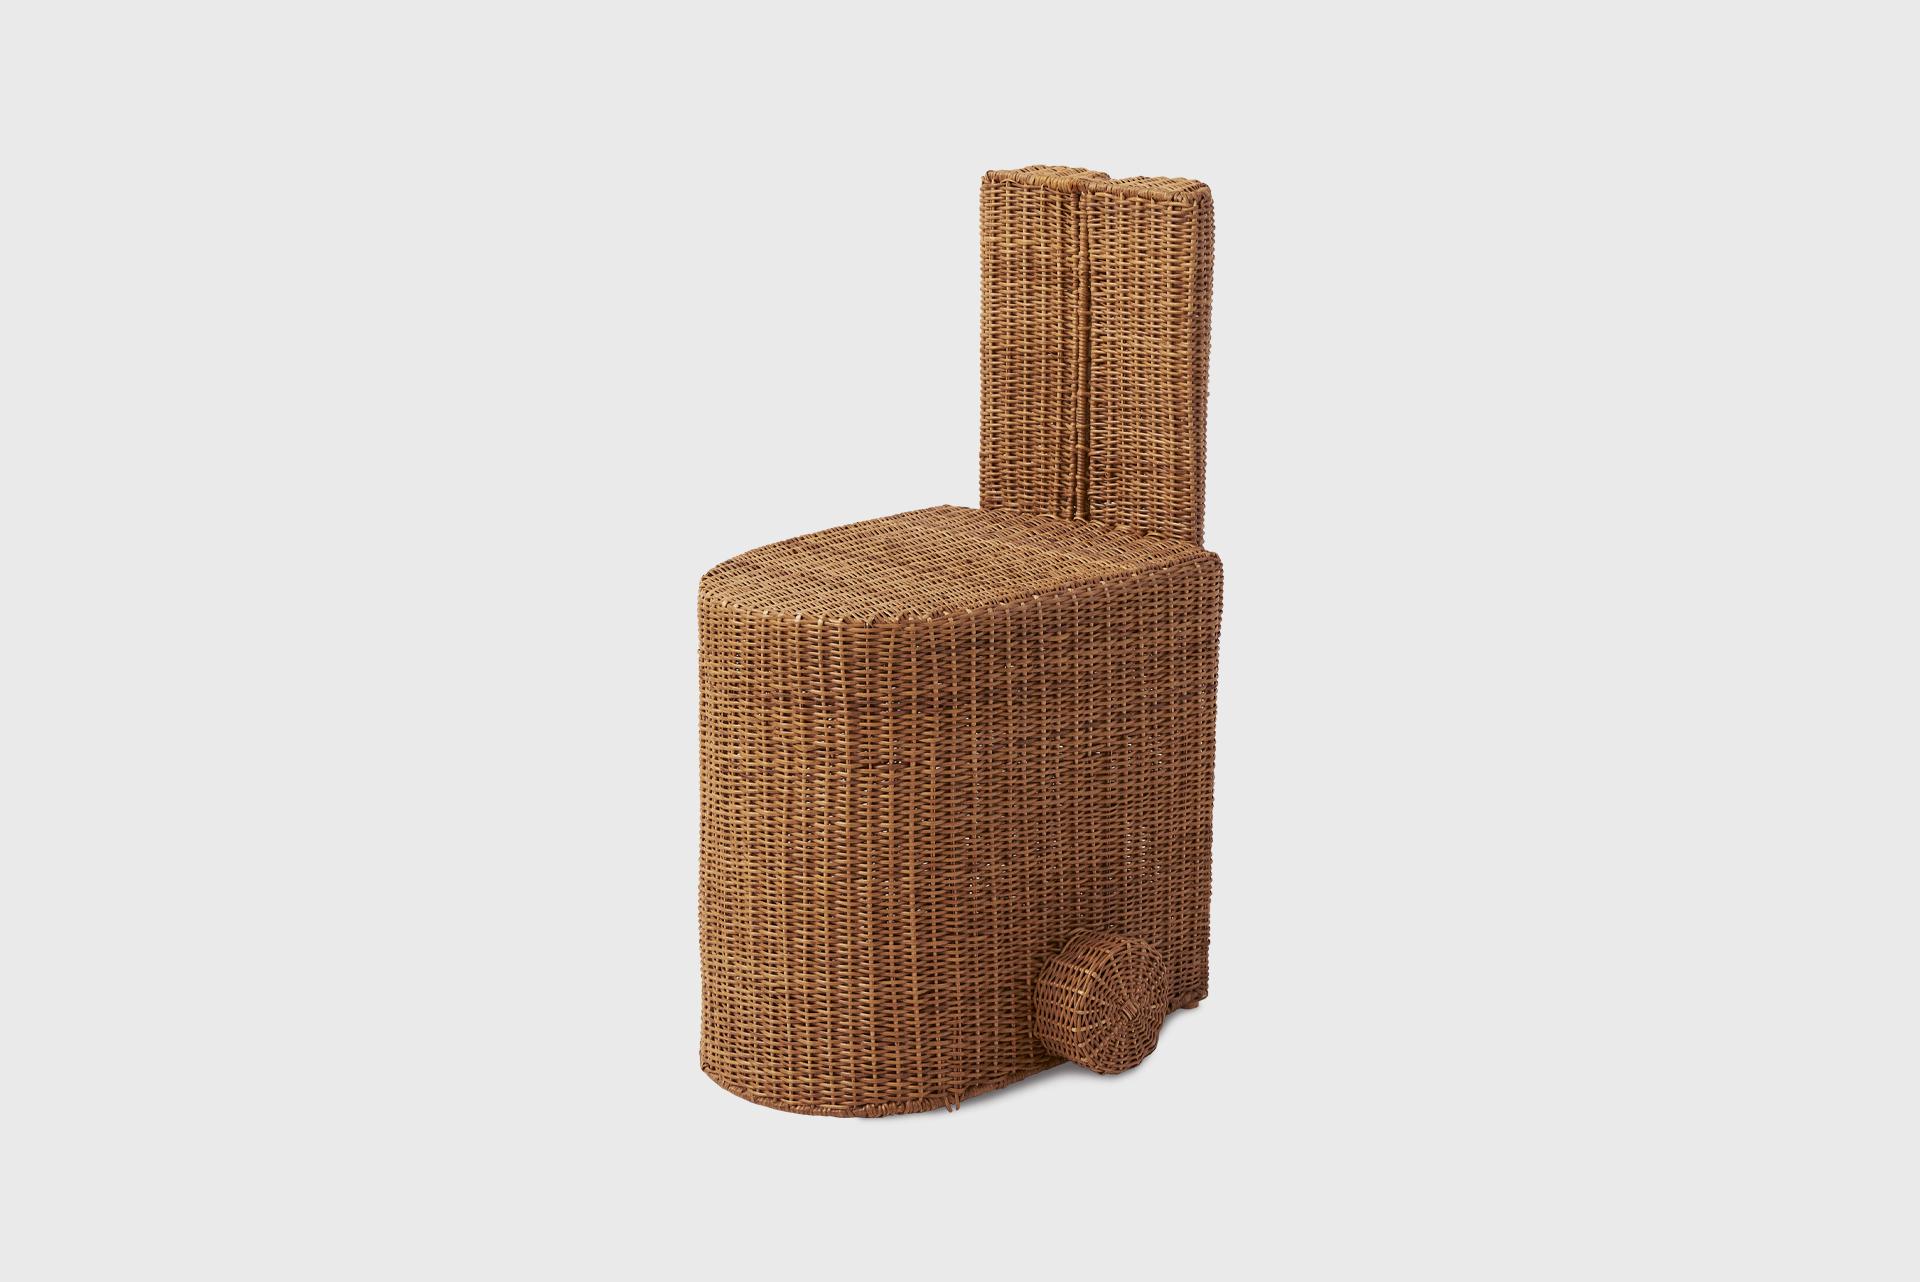 Contemporary Chair, Sustainable Natural Yaré Fiber, by Fango 'F. Jaramillo' For Sale 2